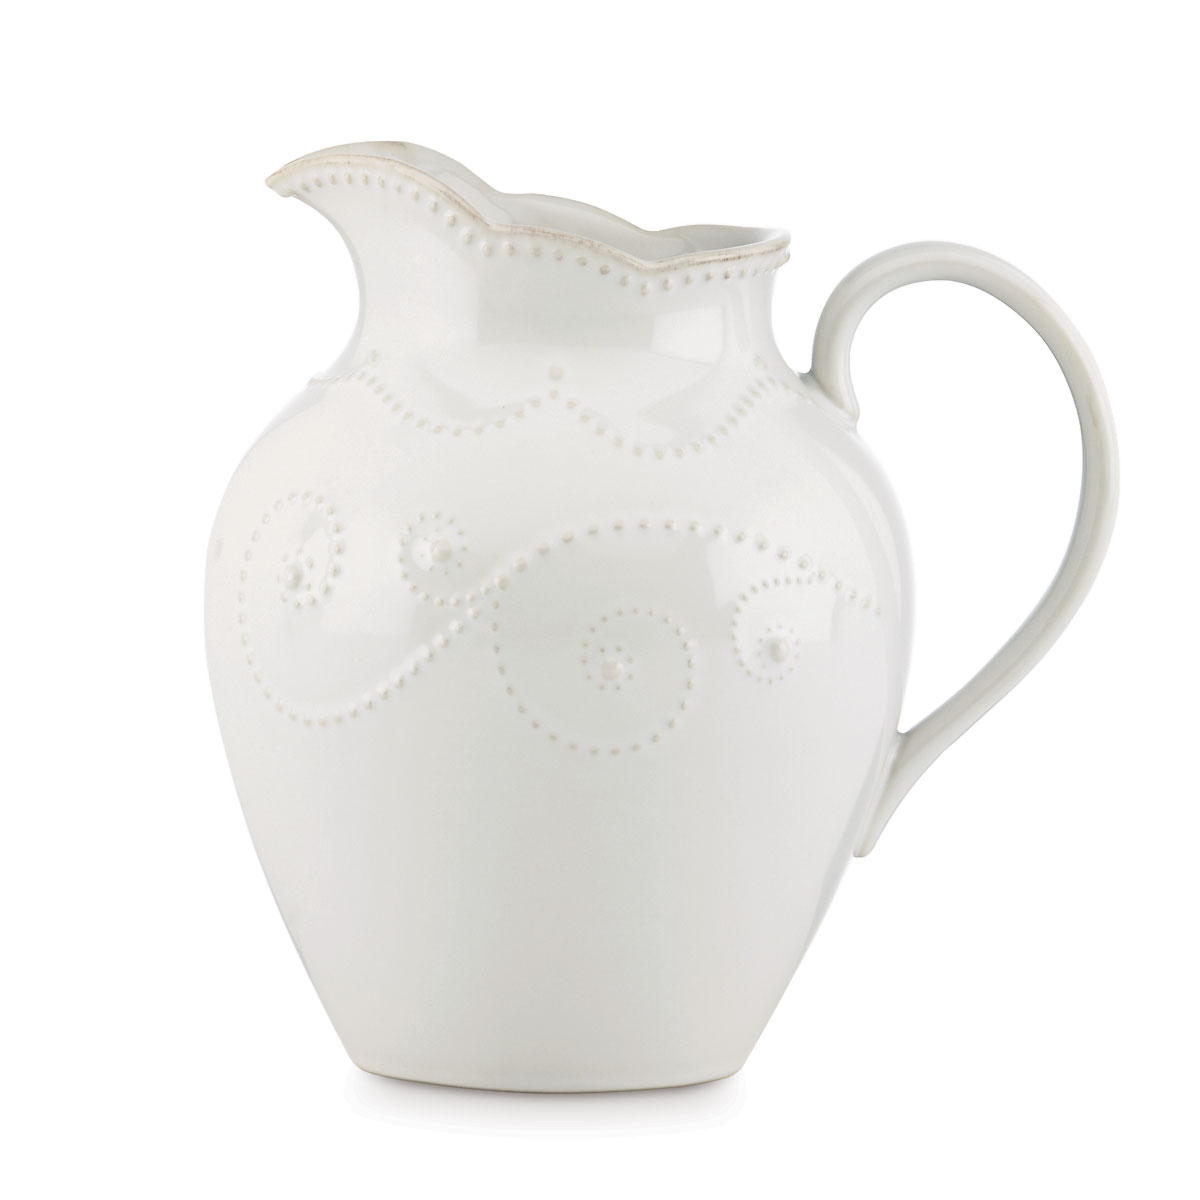 Lenox French Perle White China Pitcher Md